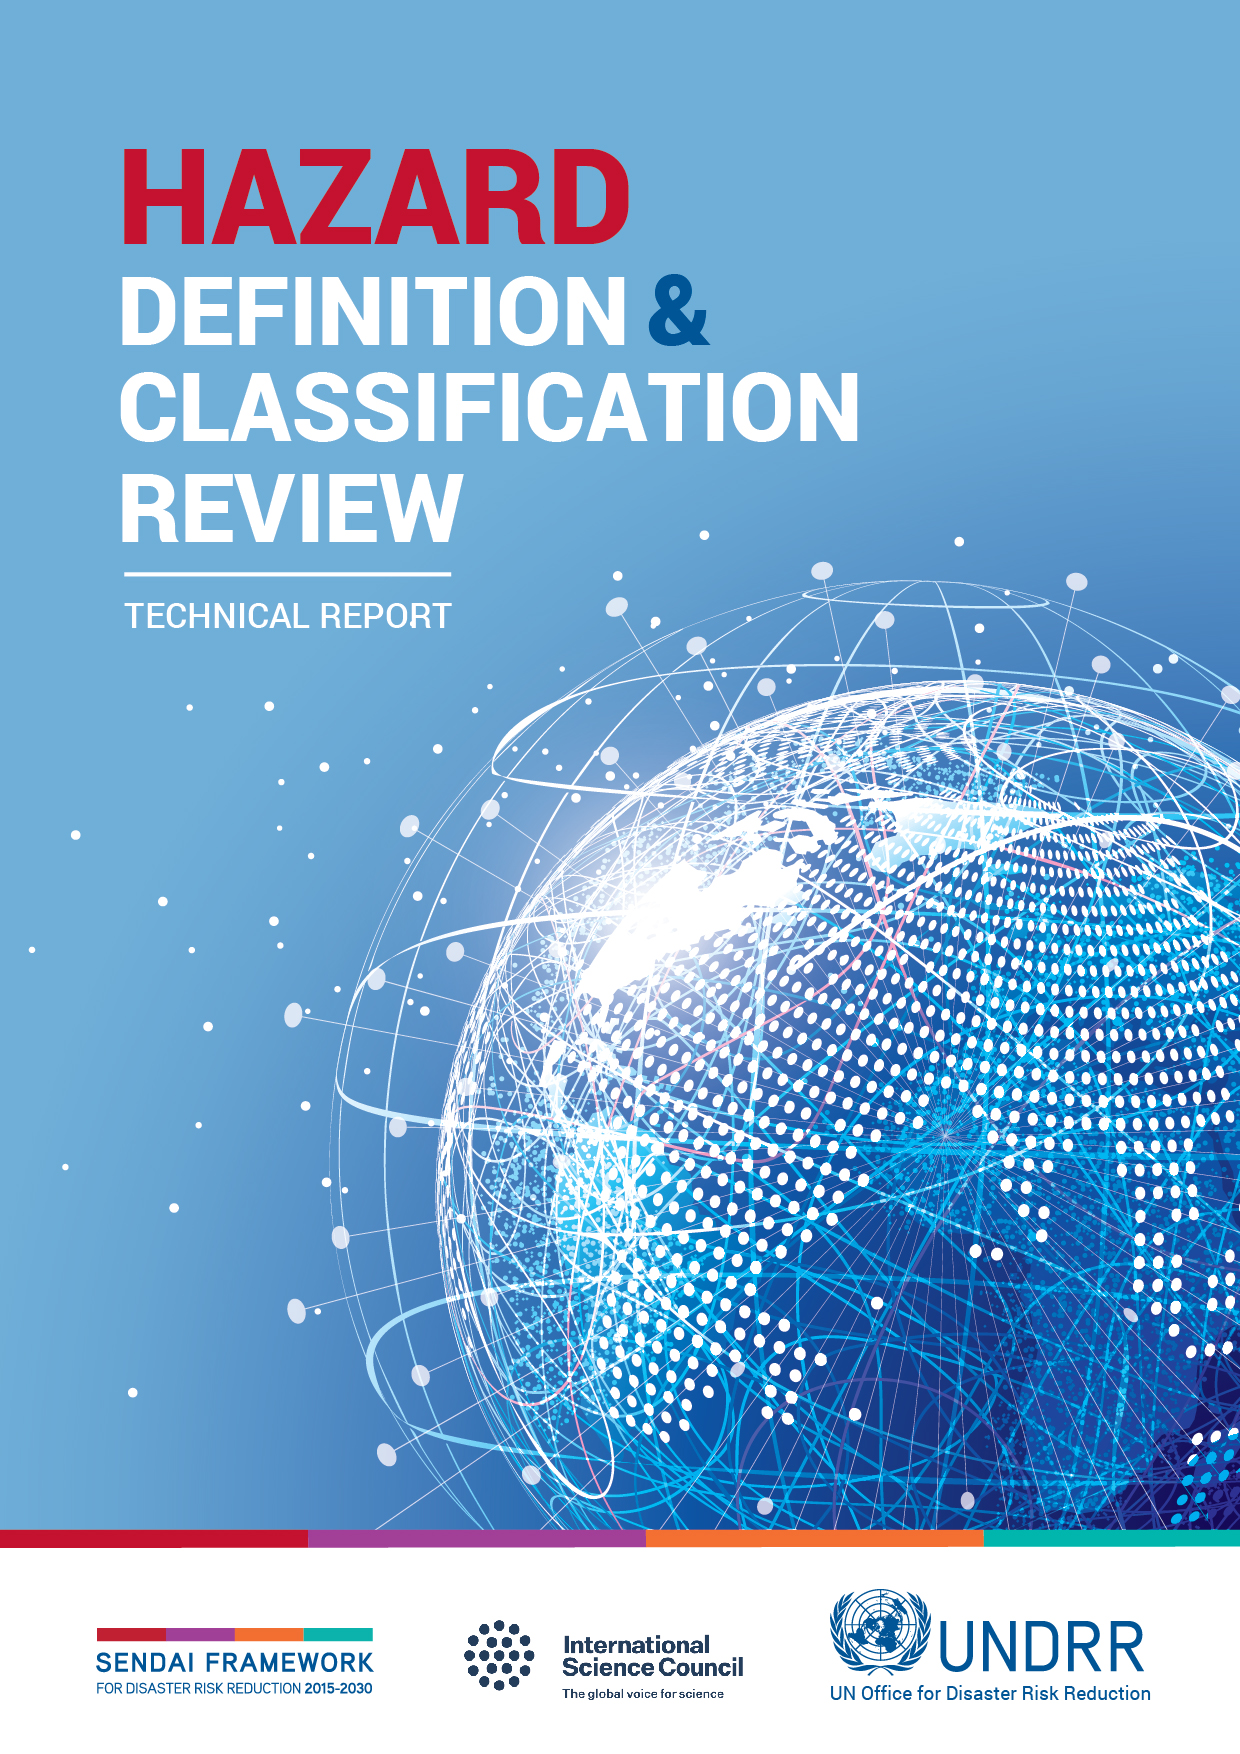 Hazard definition and classification review (Technical Report) | UNDRR